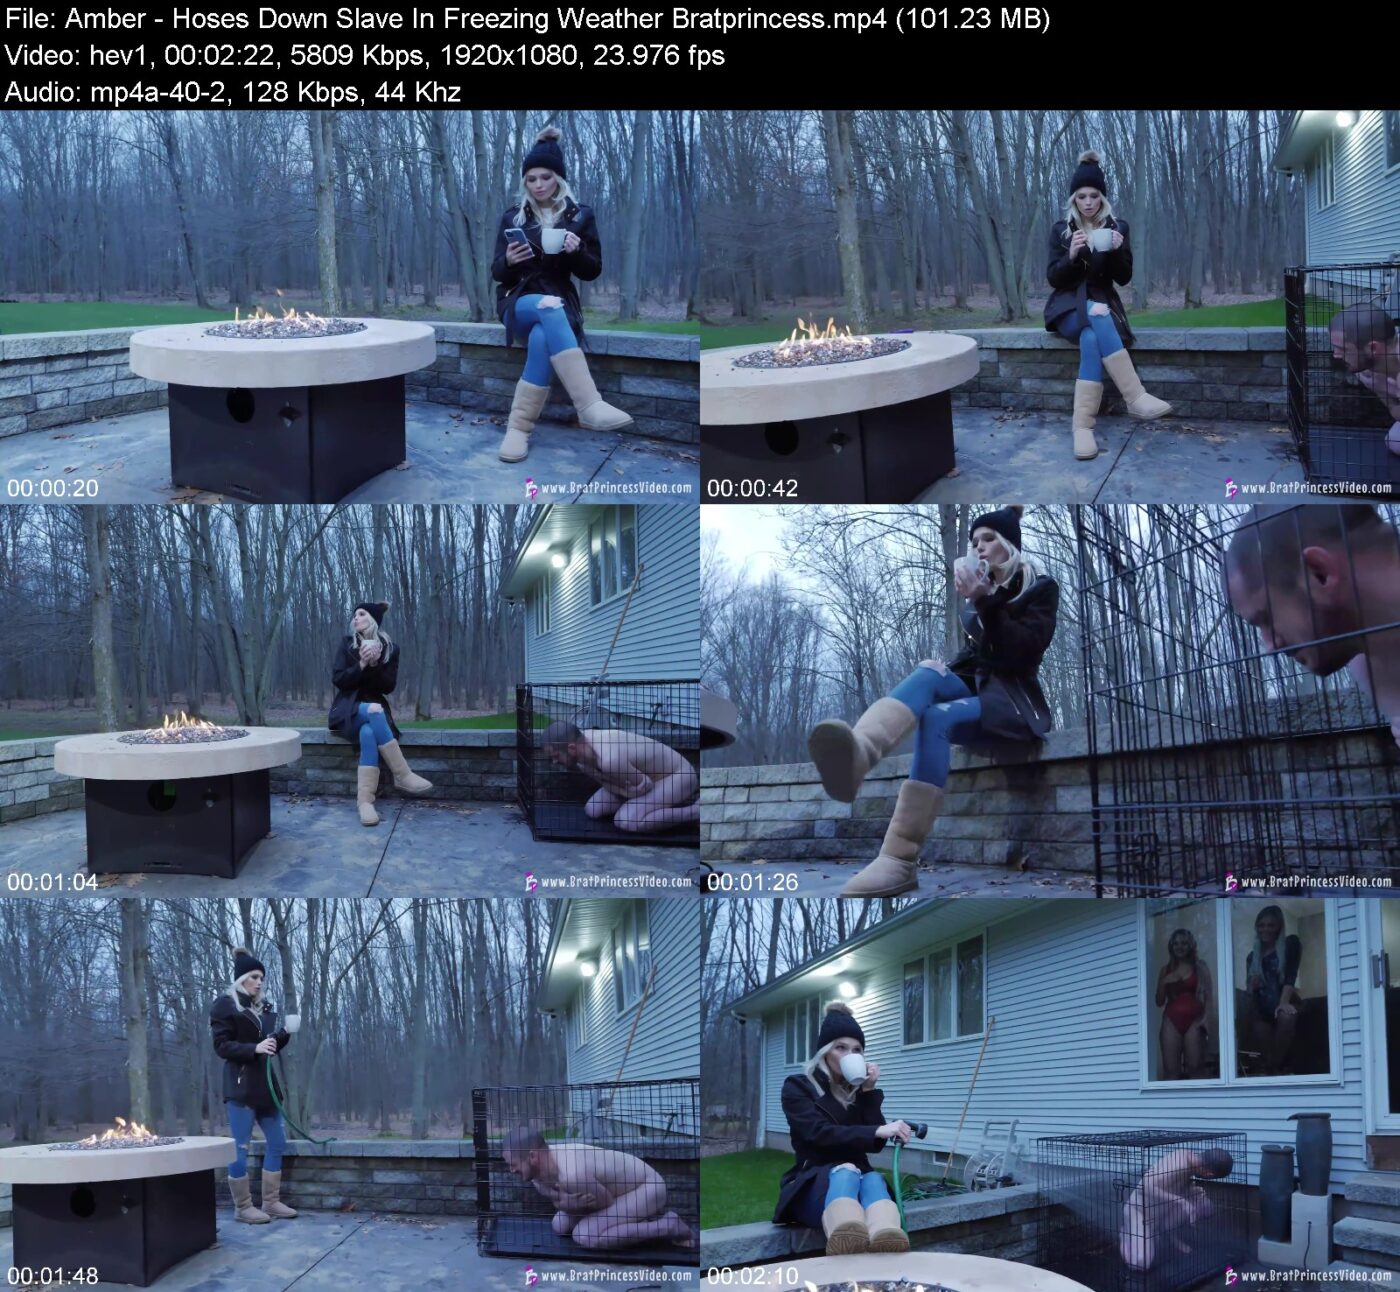 Actress: Amber. Title and Studio: Hoses Down Slave In Freezing Weather Bratprincess